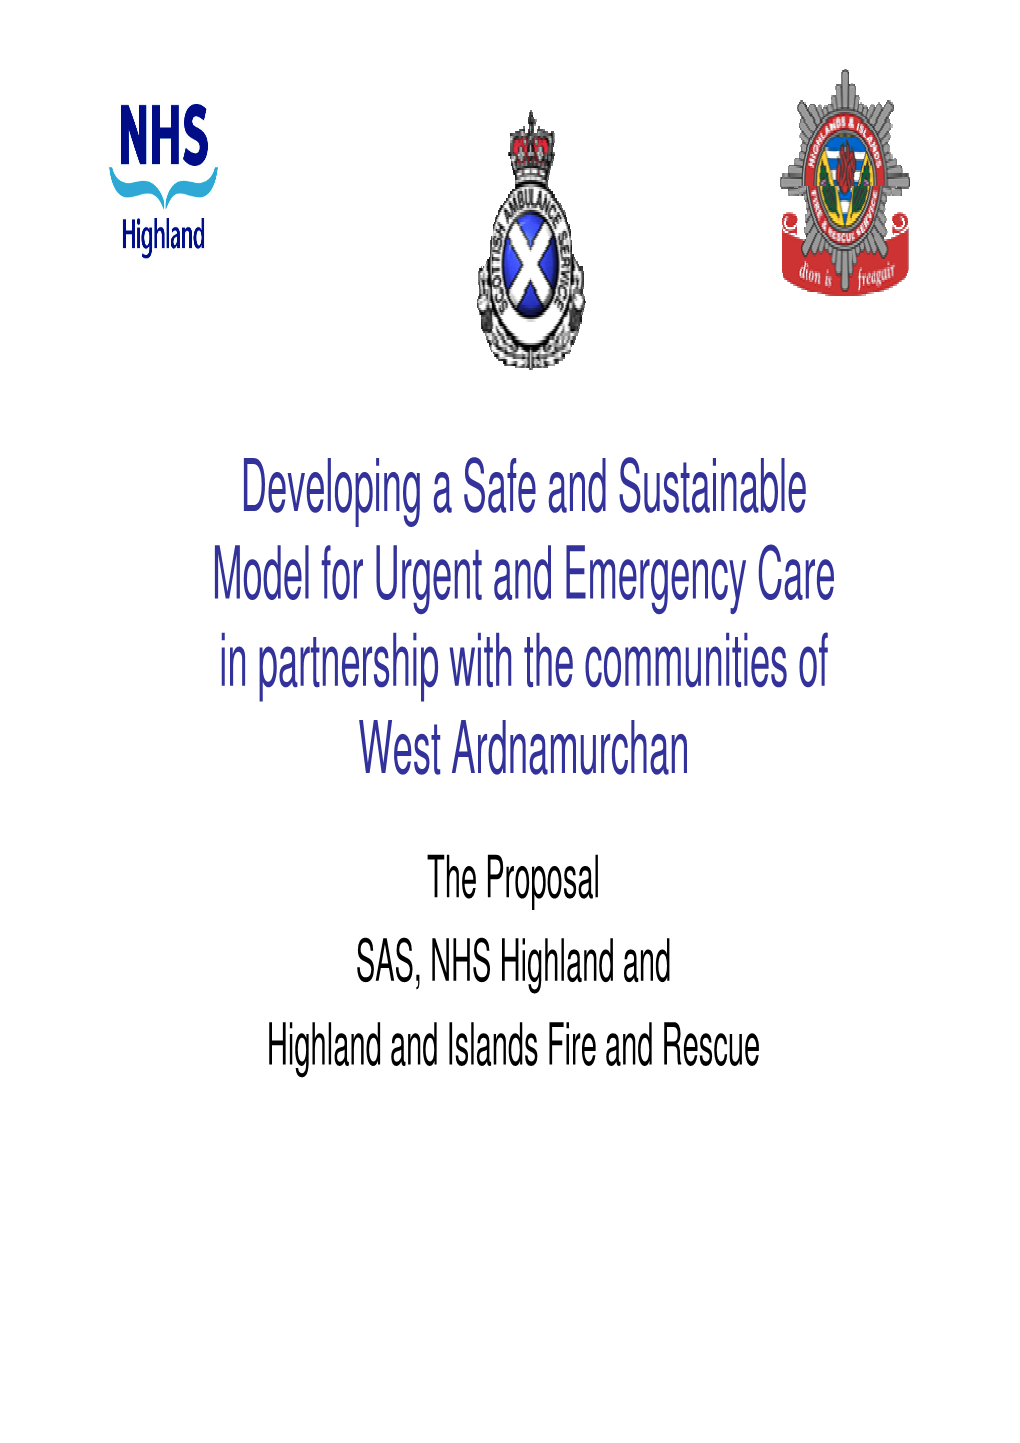 Developing a Safe and Sustainable Model for Urgent and Emergency Care in Partnership with the Communities of West Ardnamurchan